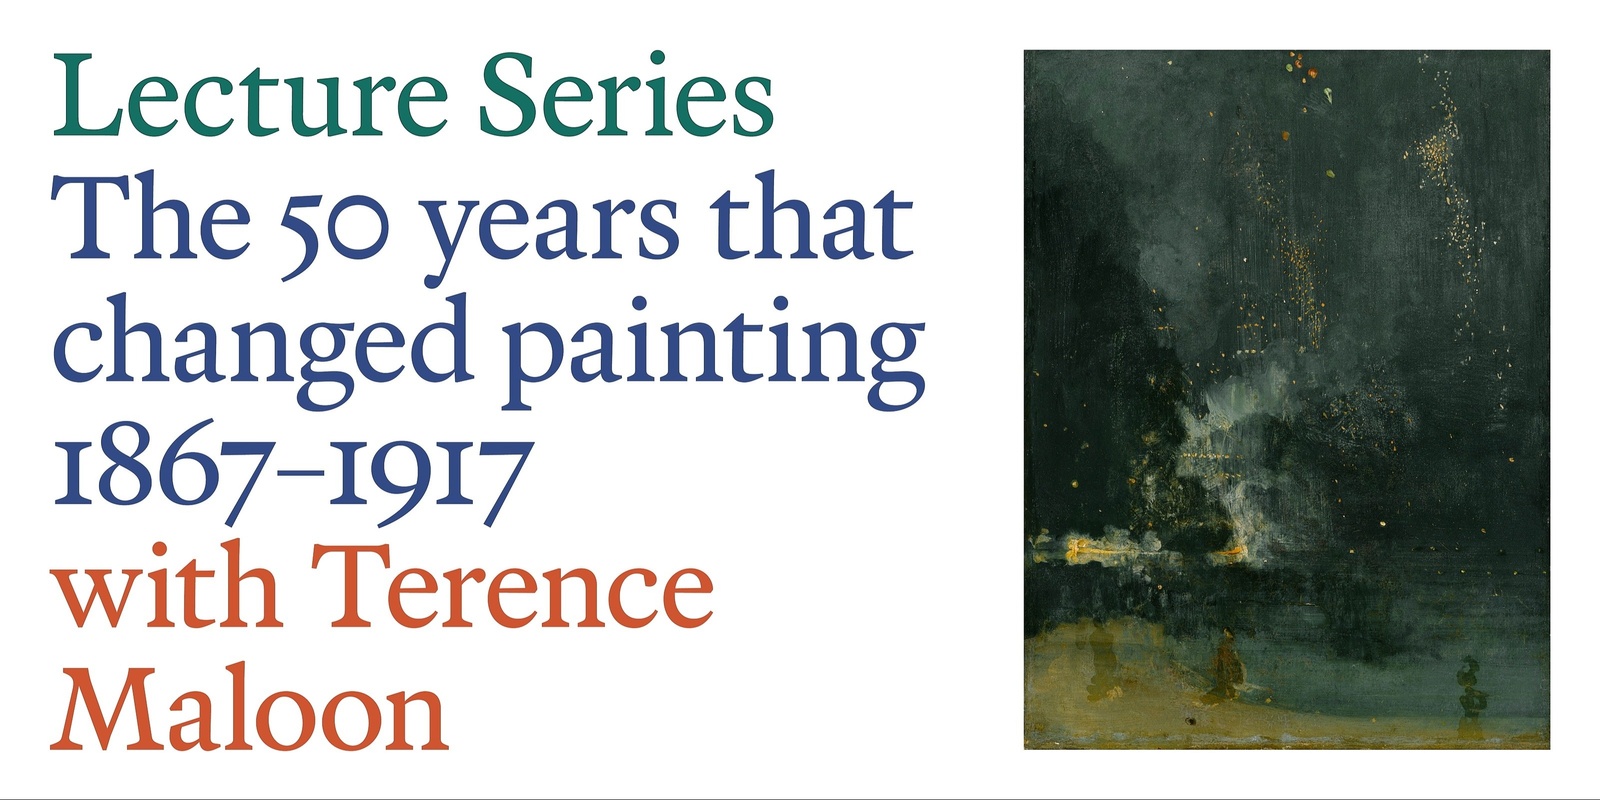 Banner image for Drill Hall Gallery Lecture Series: The 50 years that changed painting 1867-1917